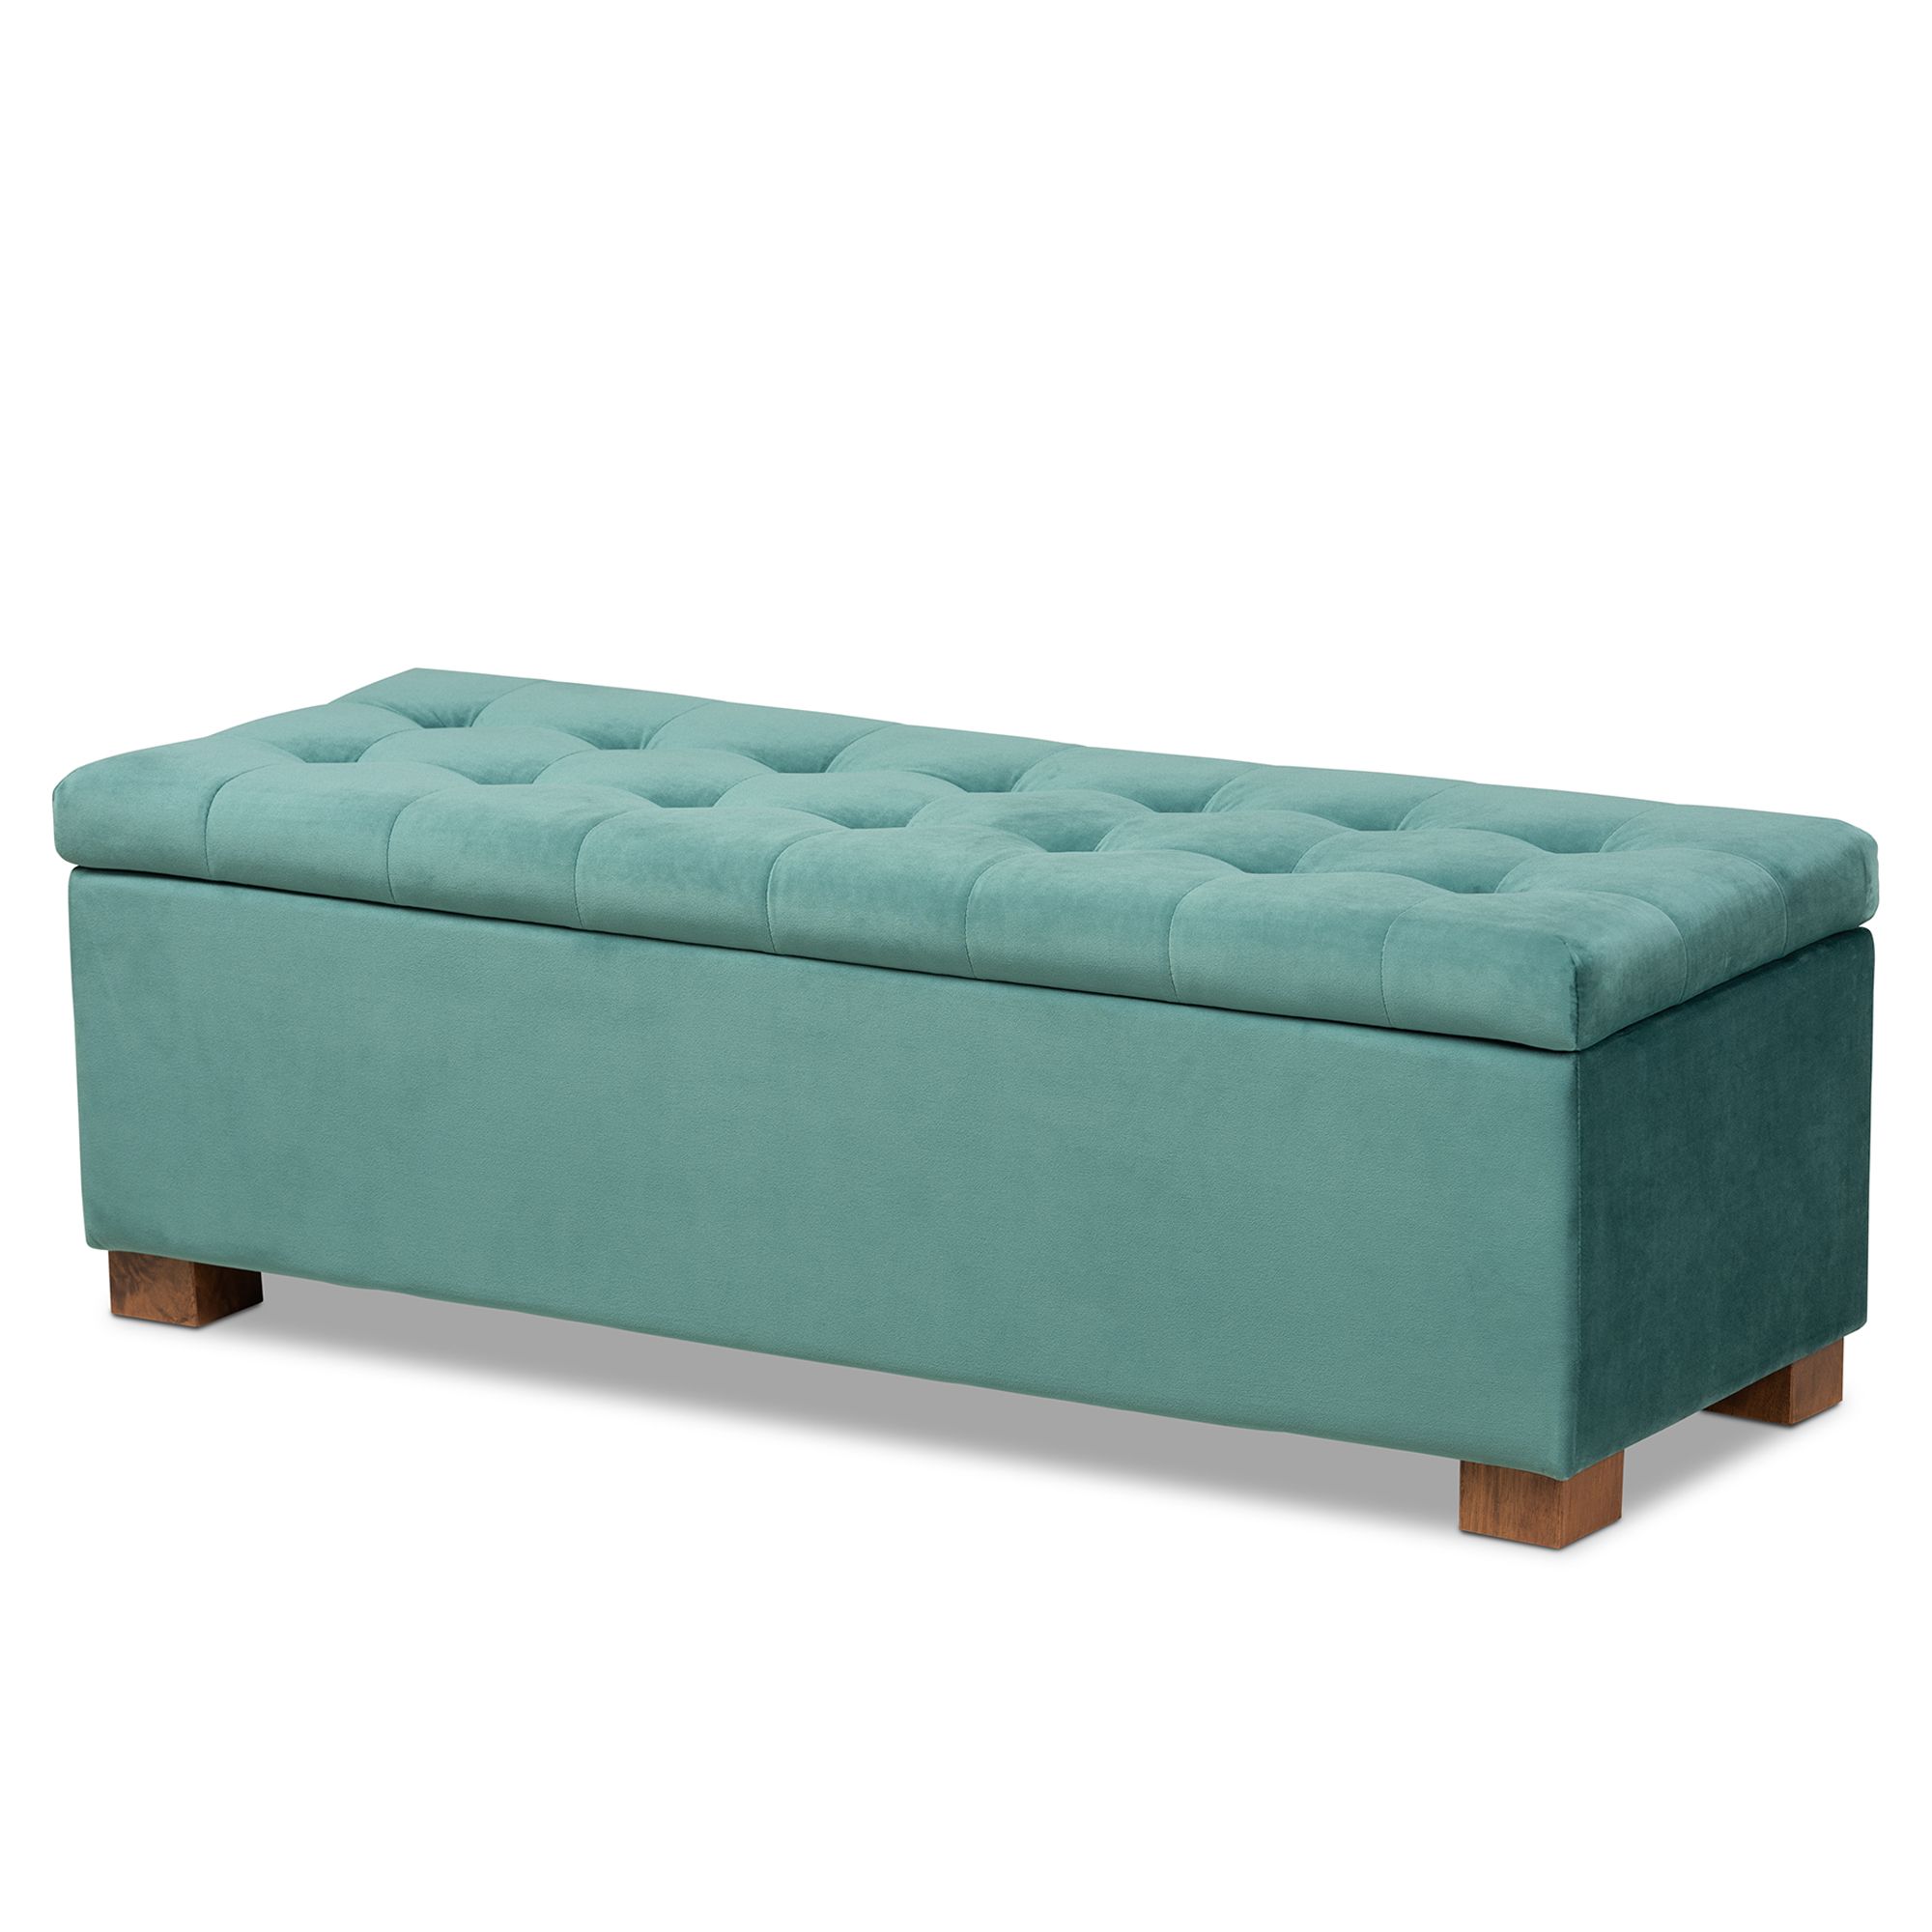 Baxton Studio Roanoke Modern and Contemporary Teal Blue Velvet Fabric Upholstered Grid-Tufted Storage Ottoman Bench